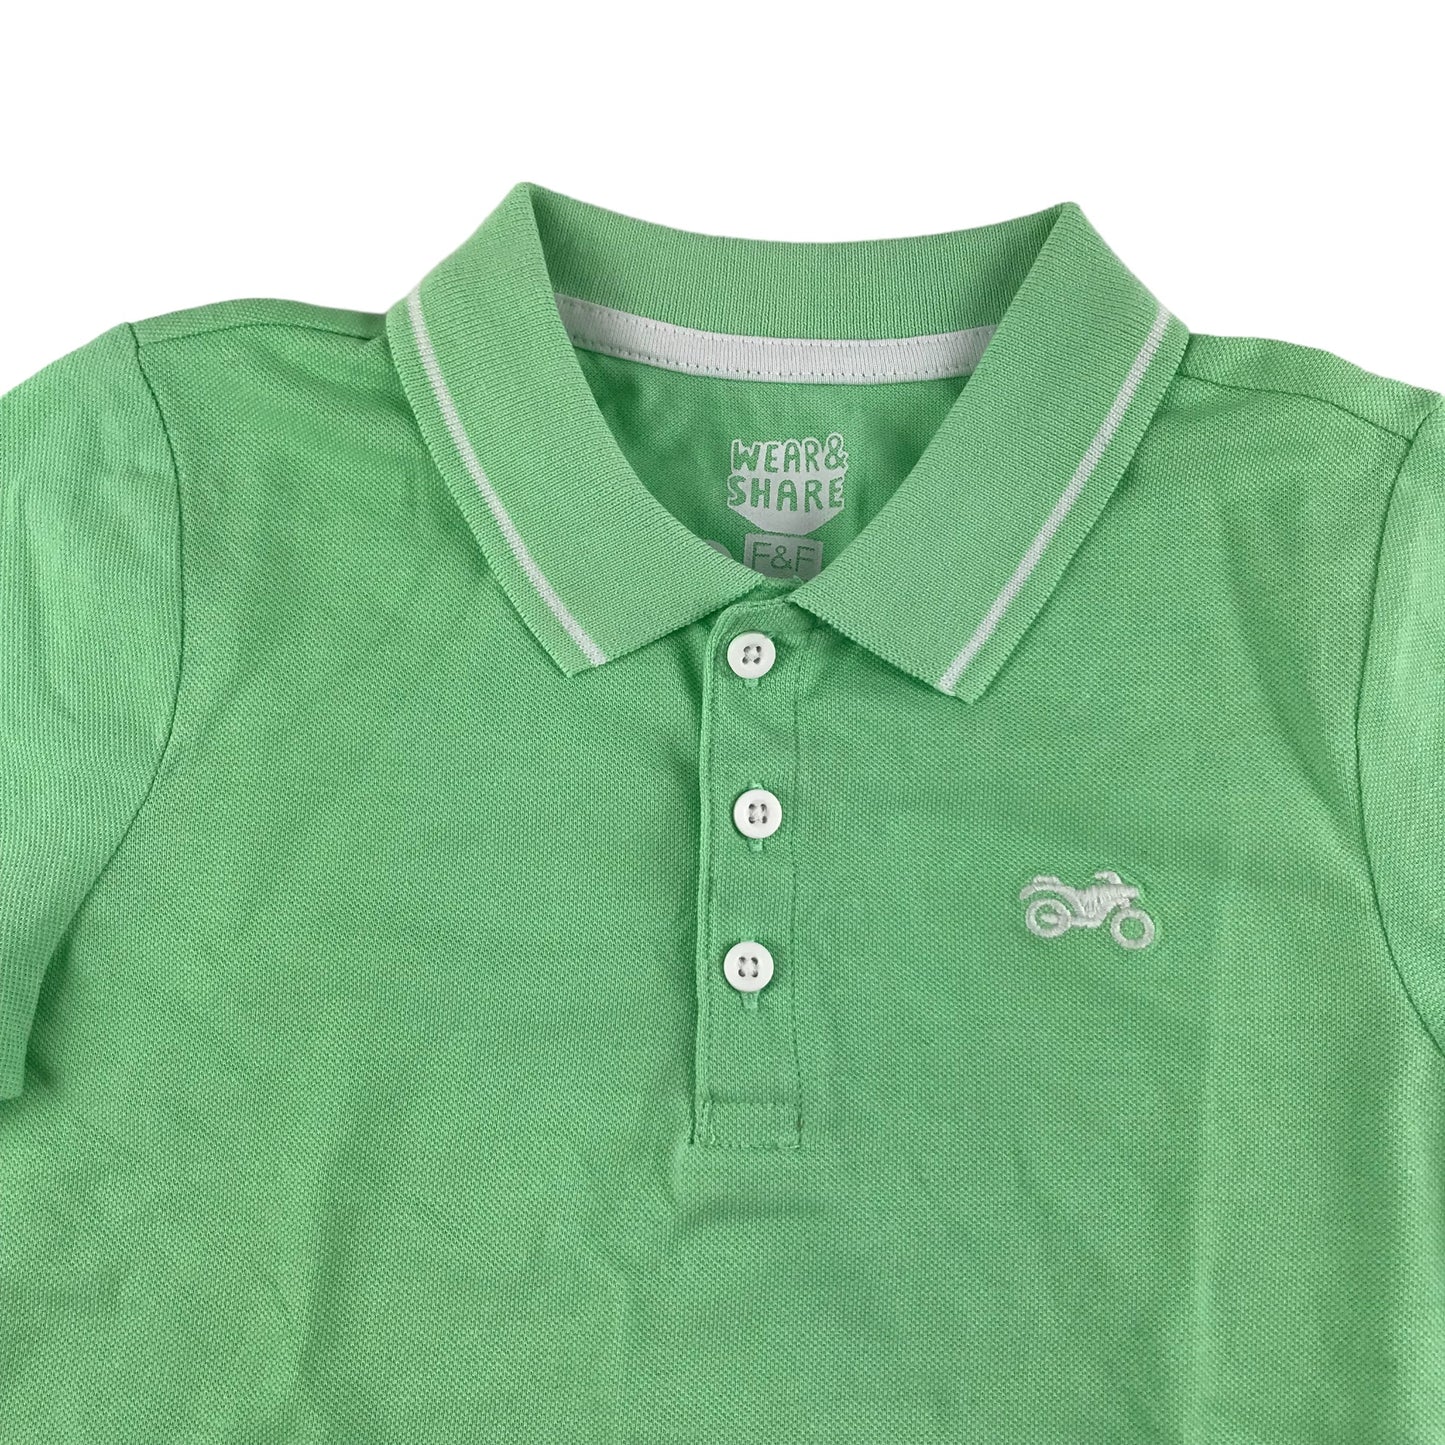 F&F Polo Shirt Age 5 Light Green Short Sleeve Button Up Neck